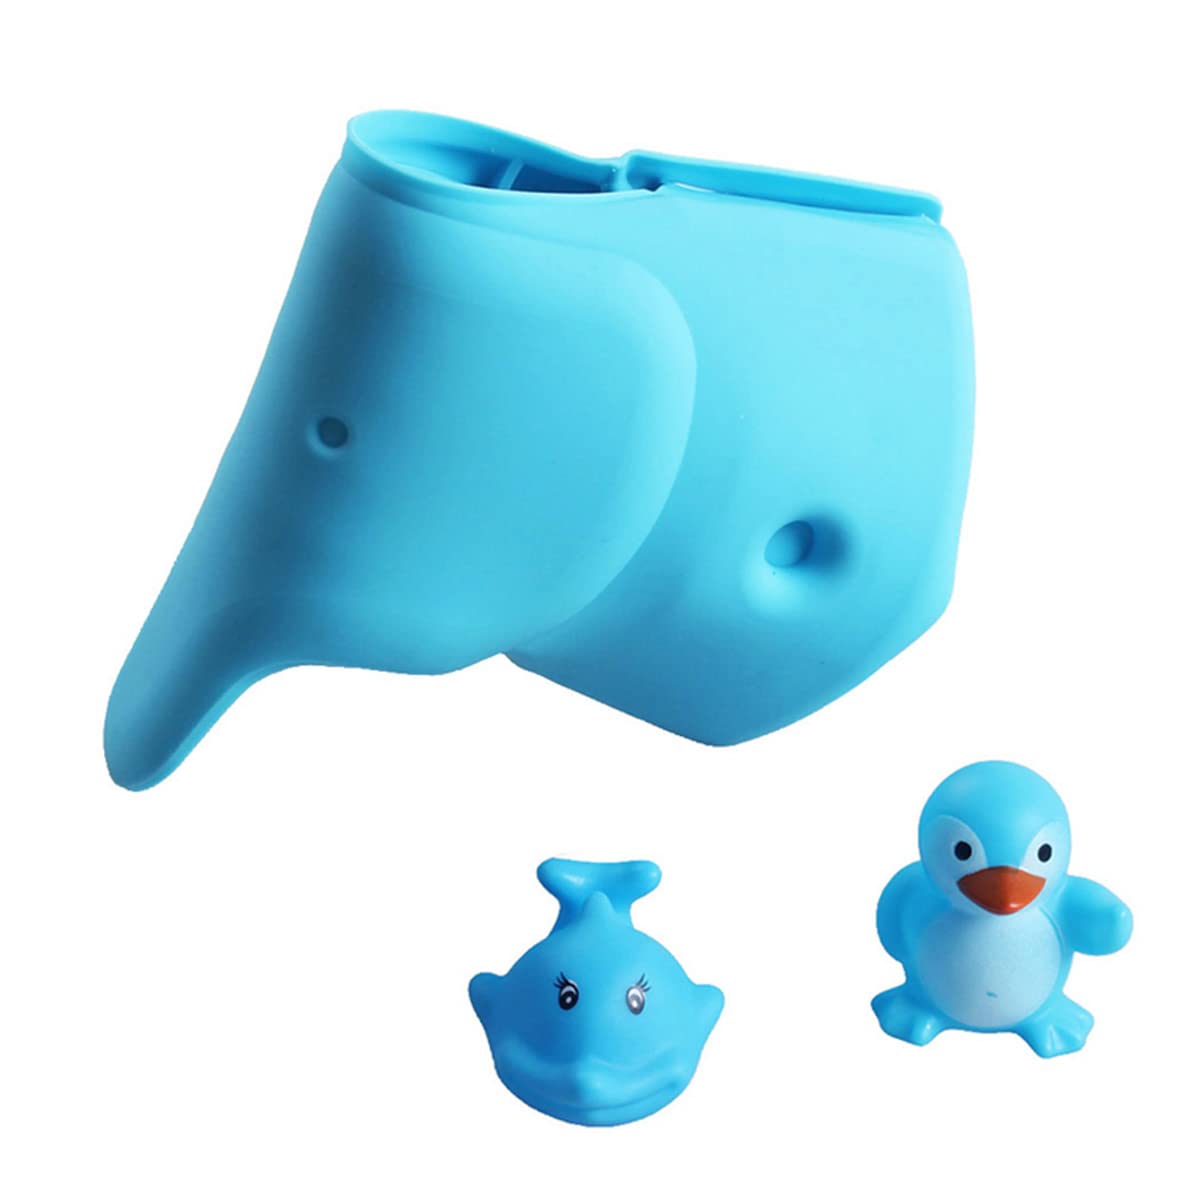 Bath Spout Cover - Faucet Cover Baby - Tub Spout Cover Bathtub Faucet Cover for Kids -Tub Faucet Protector for Baby - Silicone Spout Cover Blue Elephant - Kids Bathroom Accessories - Free Bathtub Toys